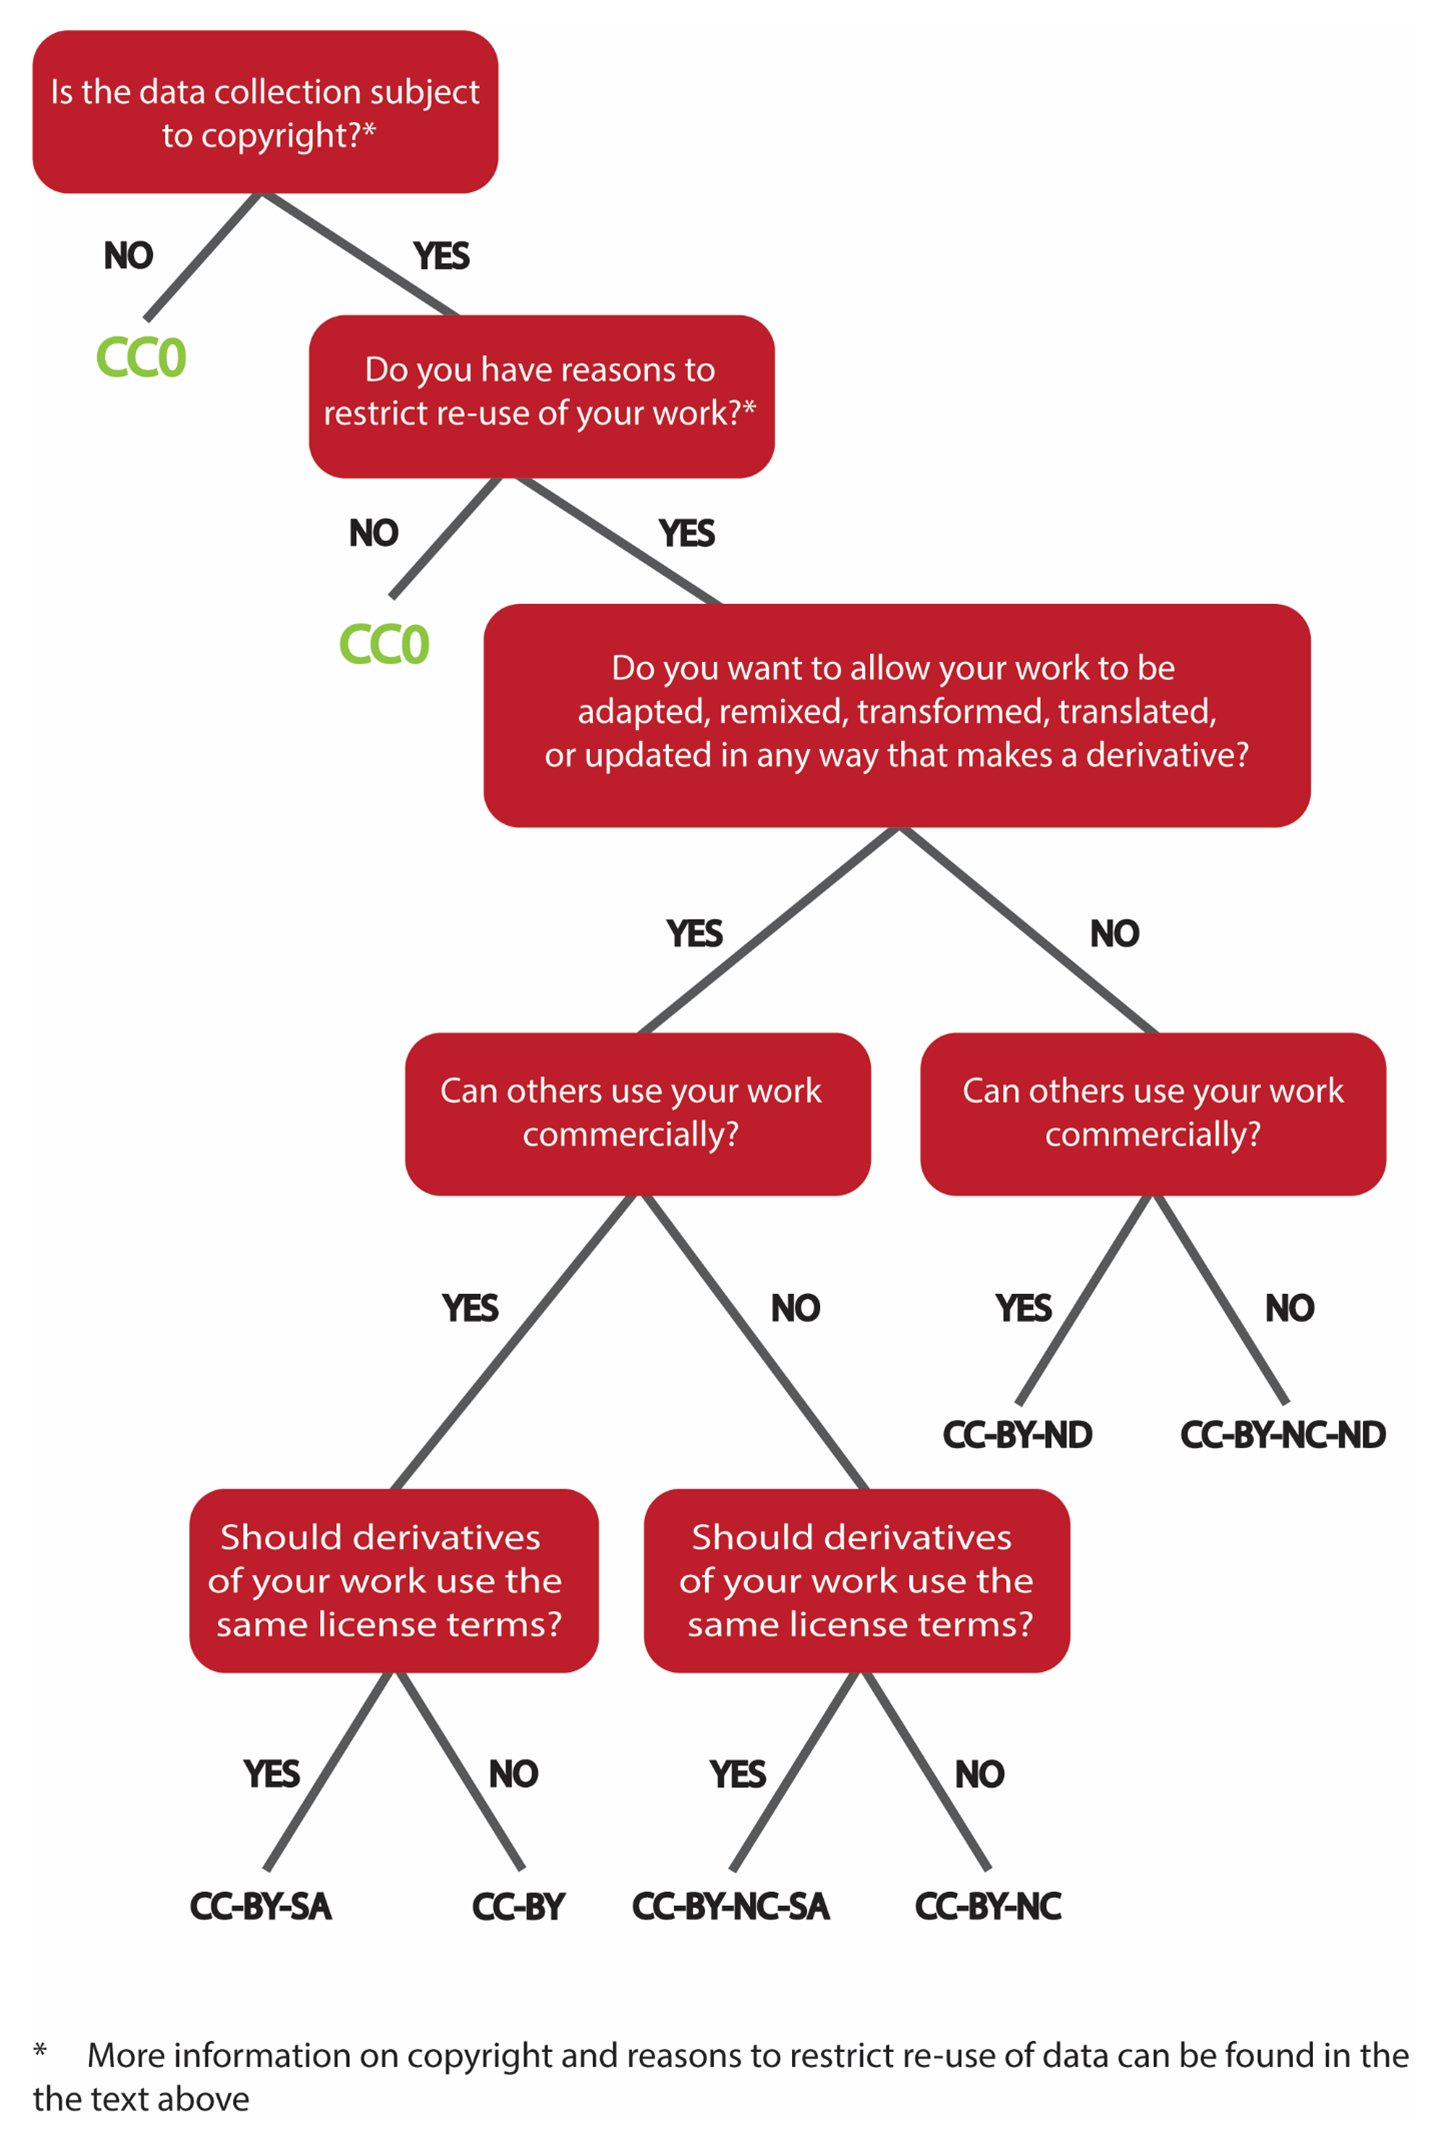 ../../_images/decision-tree-licence.png